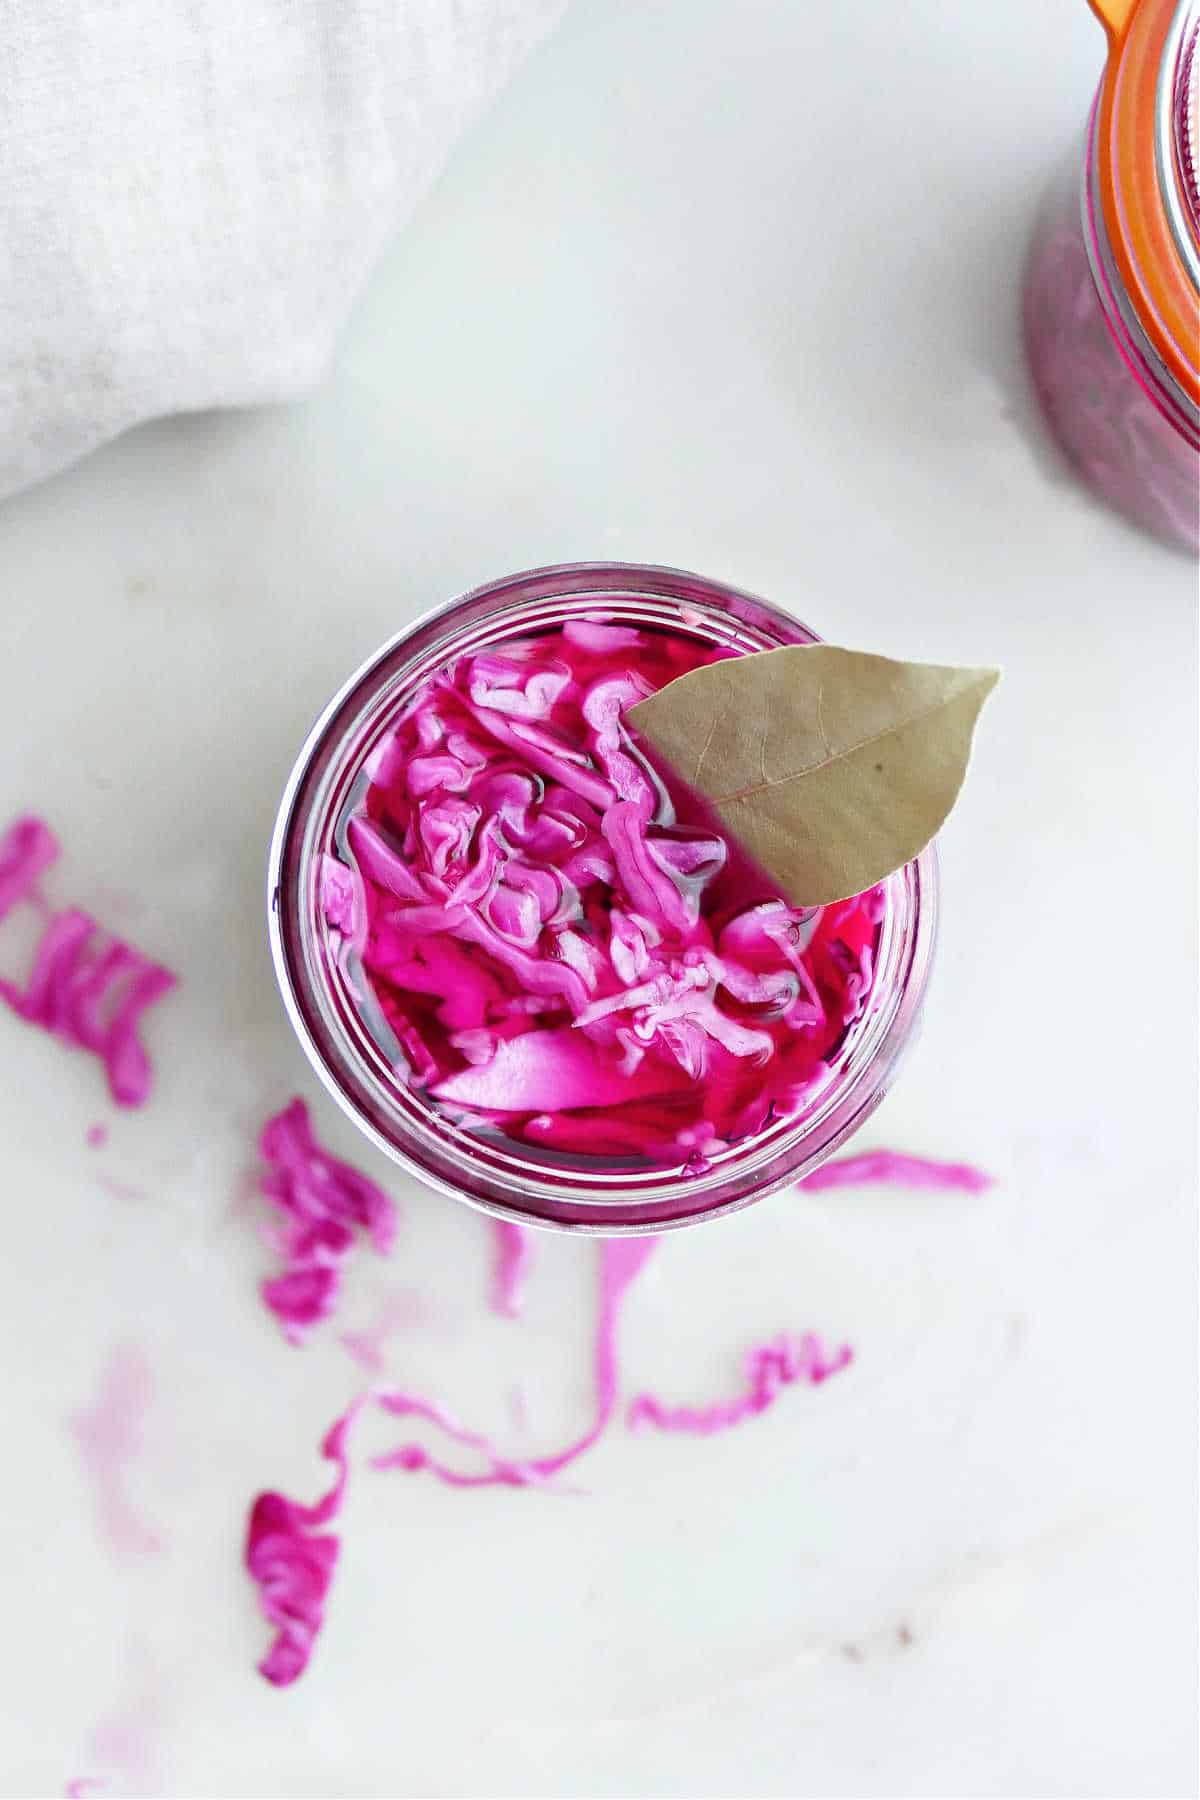 Pickled Red Cabbage in a glass jar on a counter